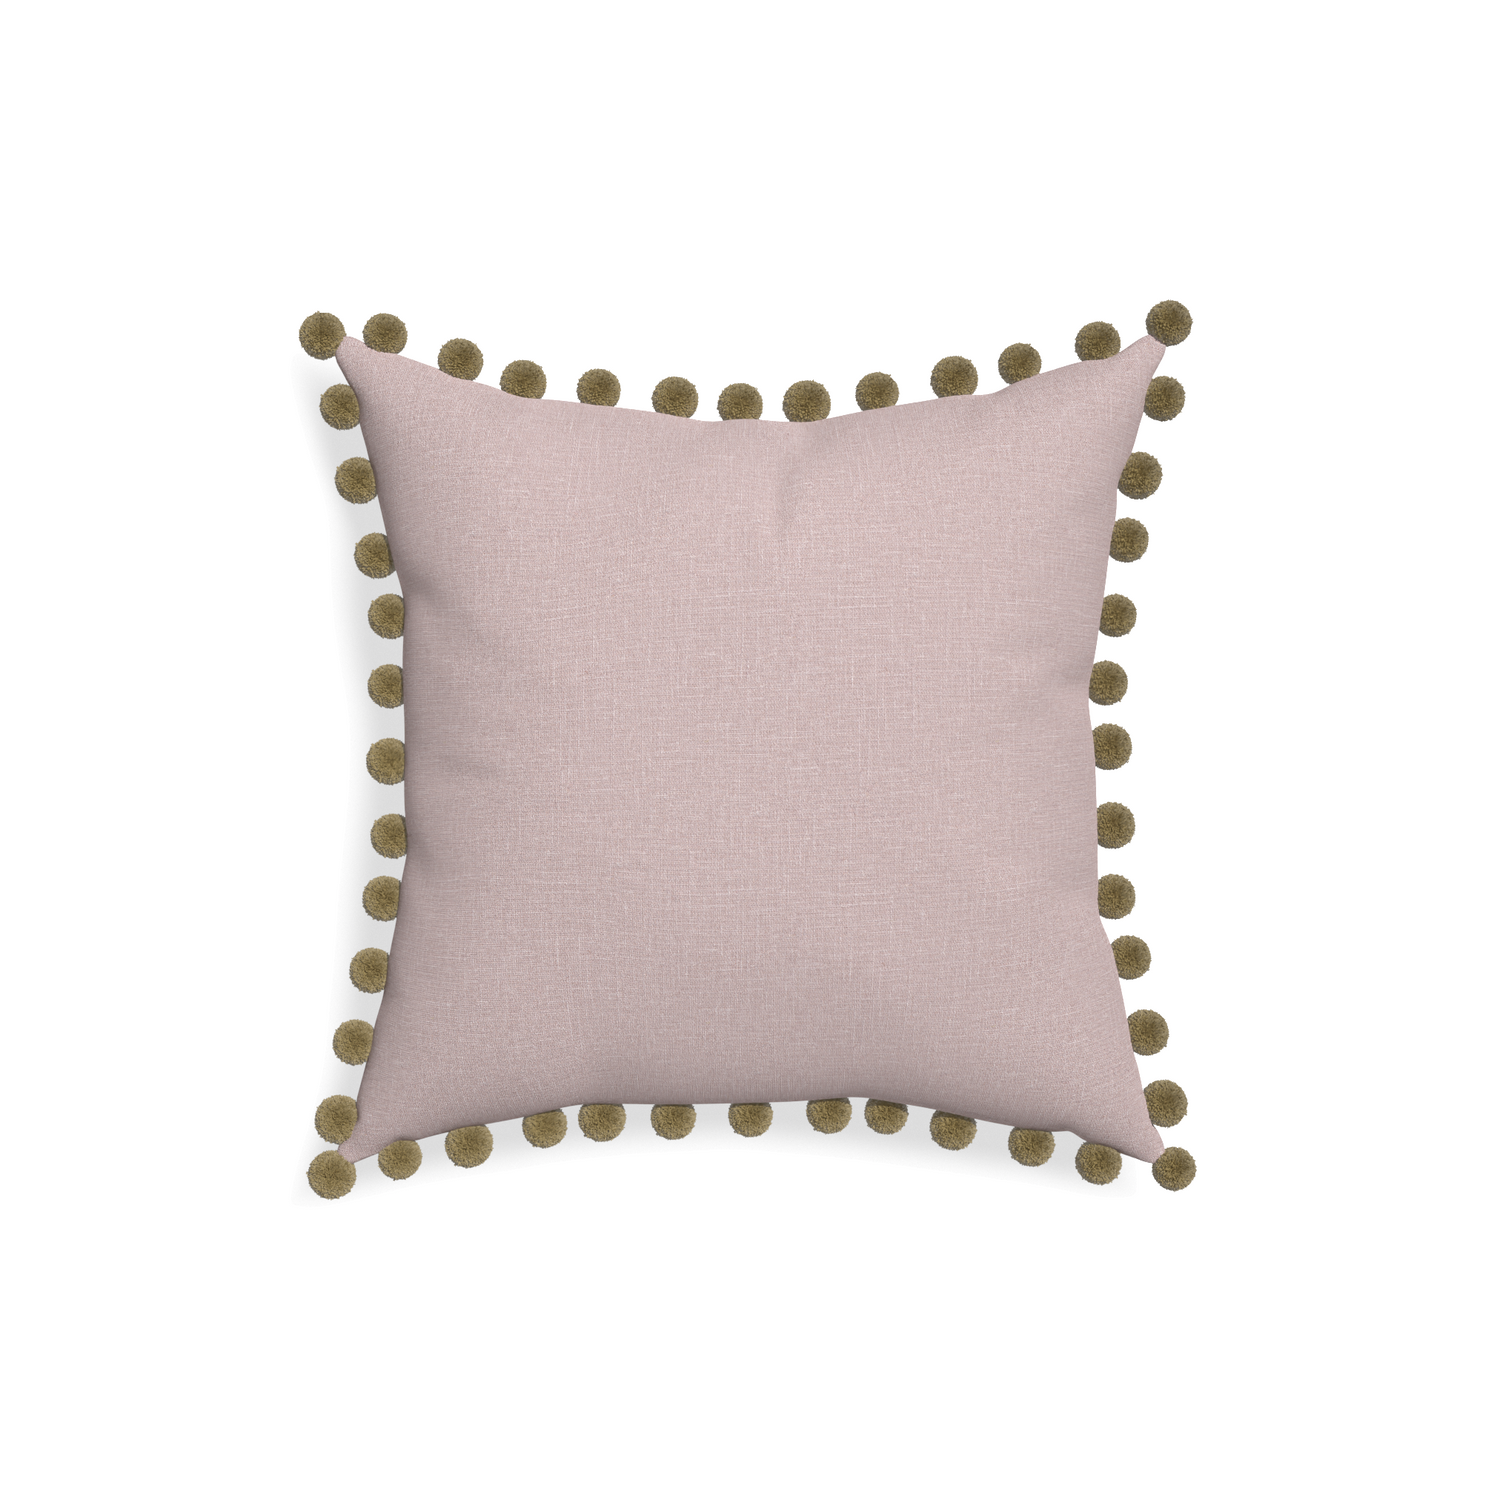 18-square orchid custom mauve pinkpillow with olive pom pom on white background